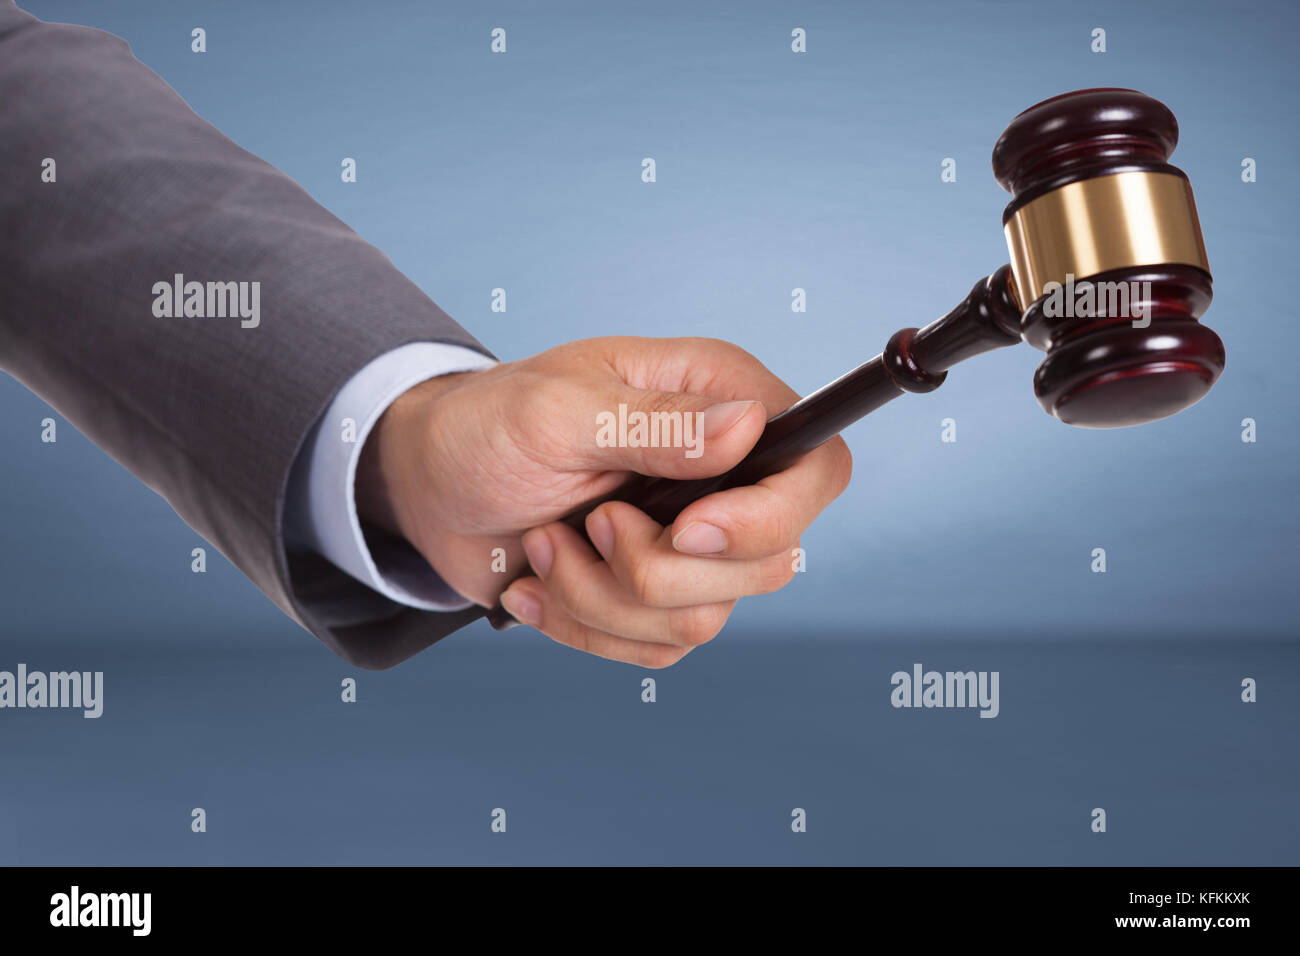 Hand holding judge mallet over blue background Stock Photo